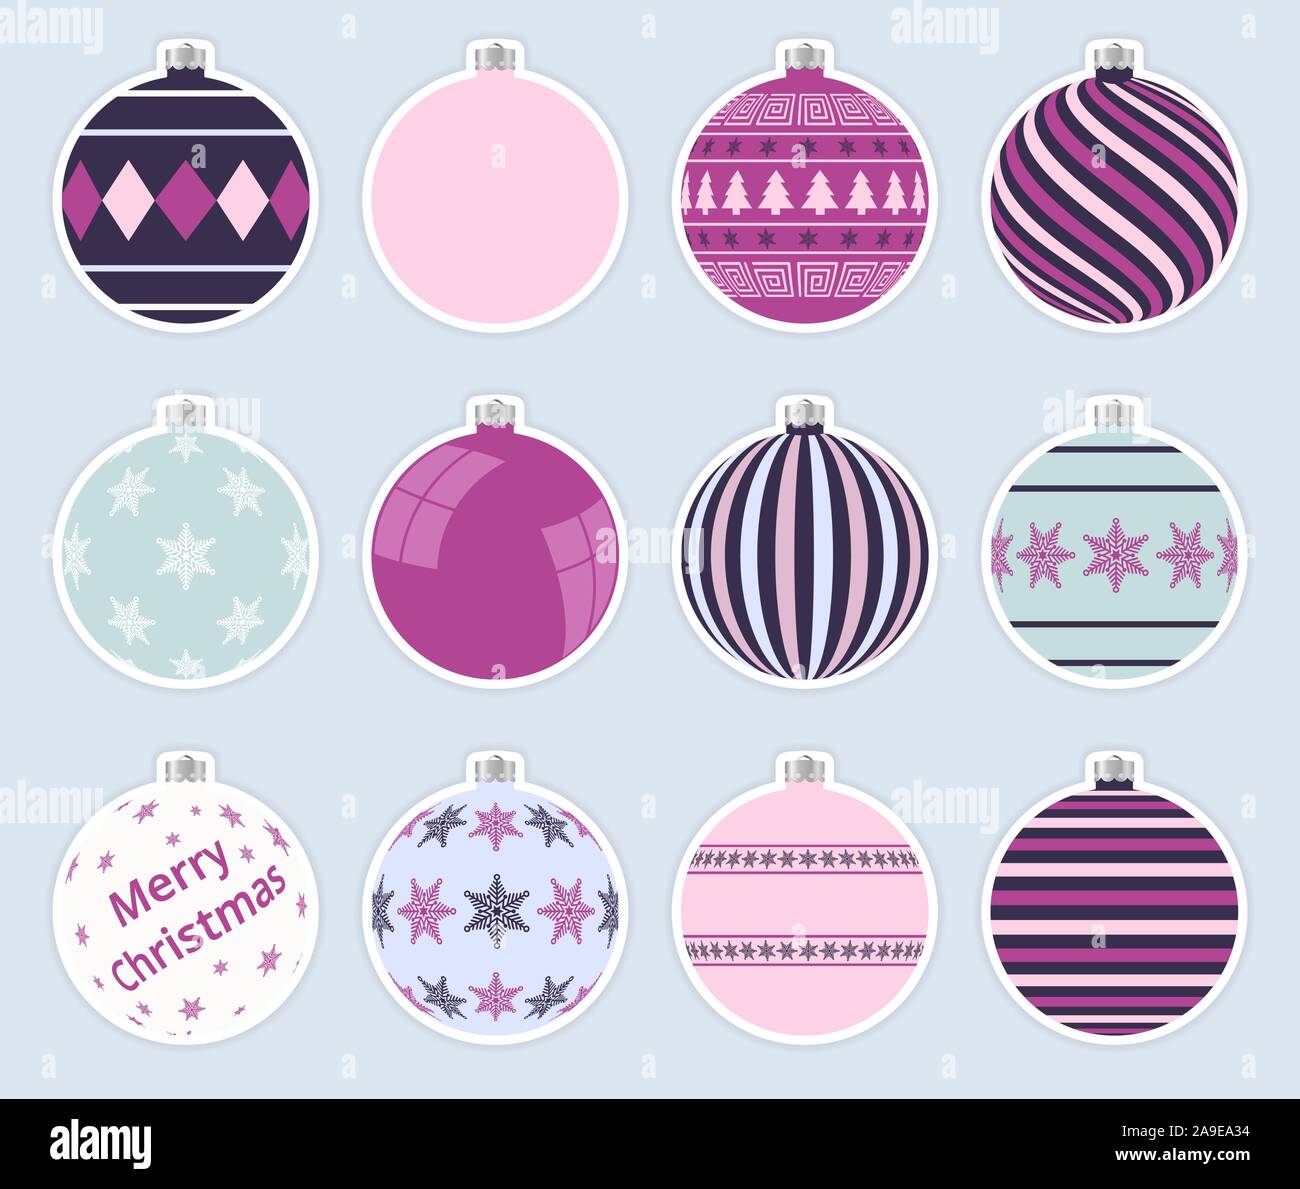 Magic, colorful christmas balls stickers isolated on gray background. High quality vector set of christmas baubles. Stock Vector